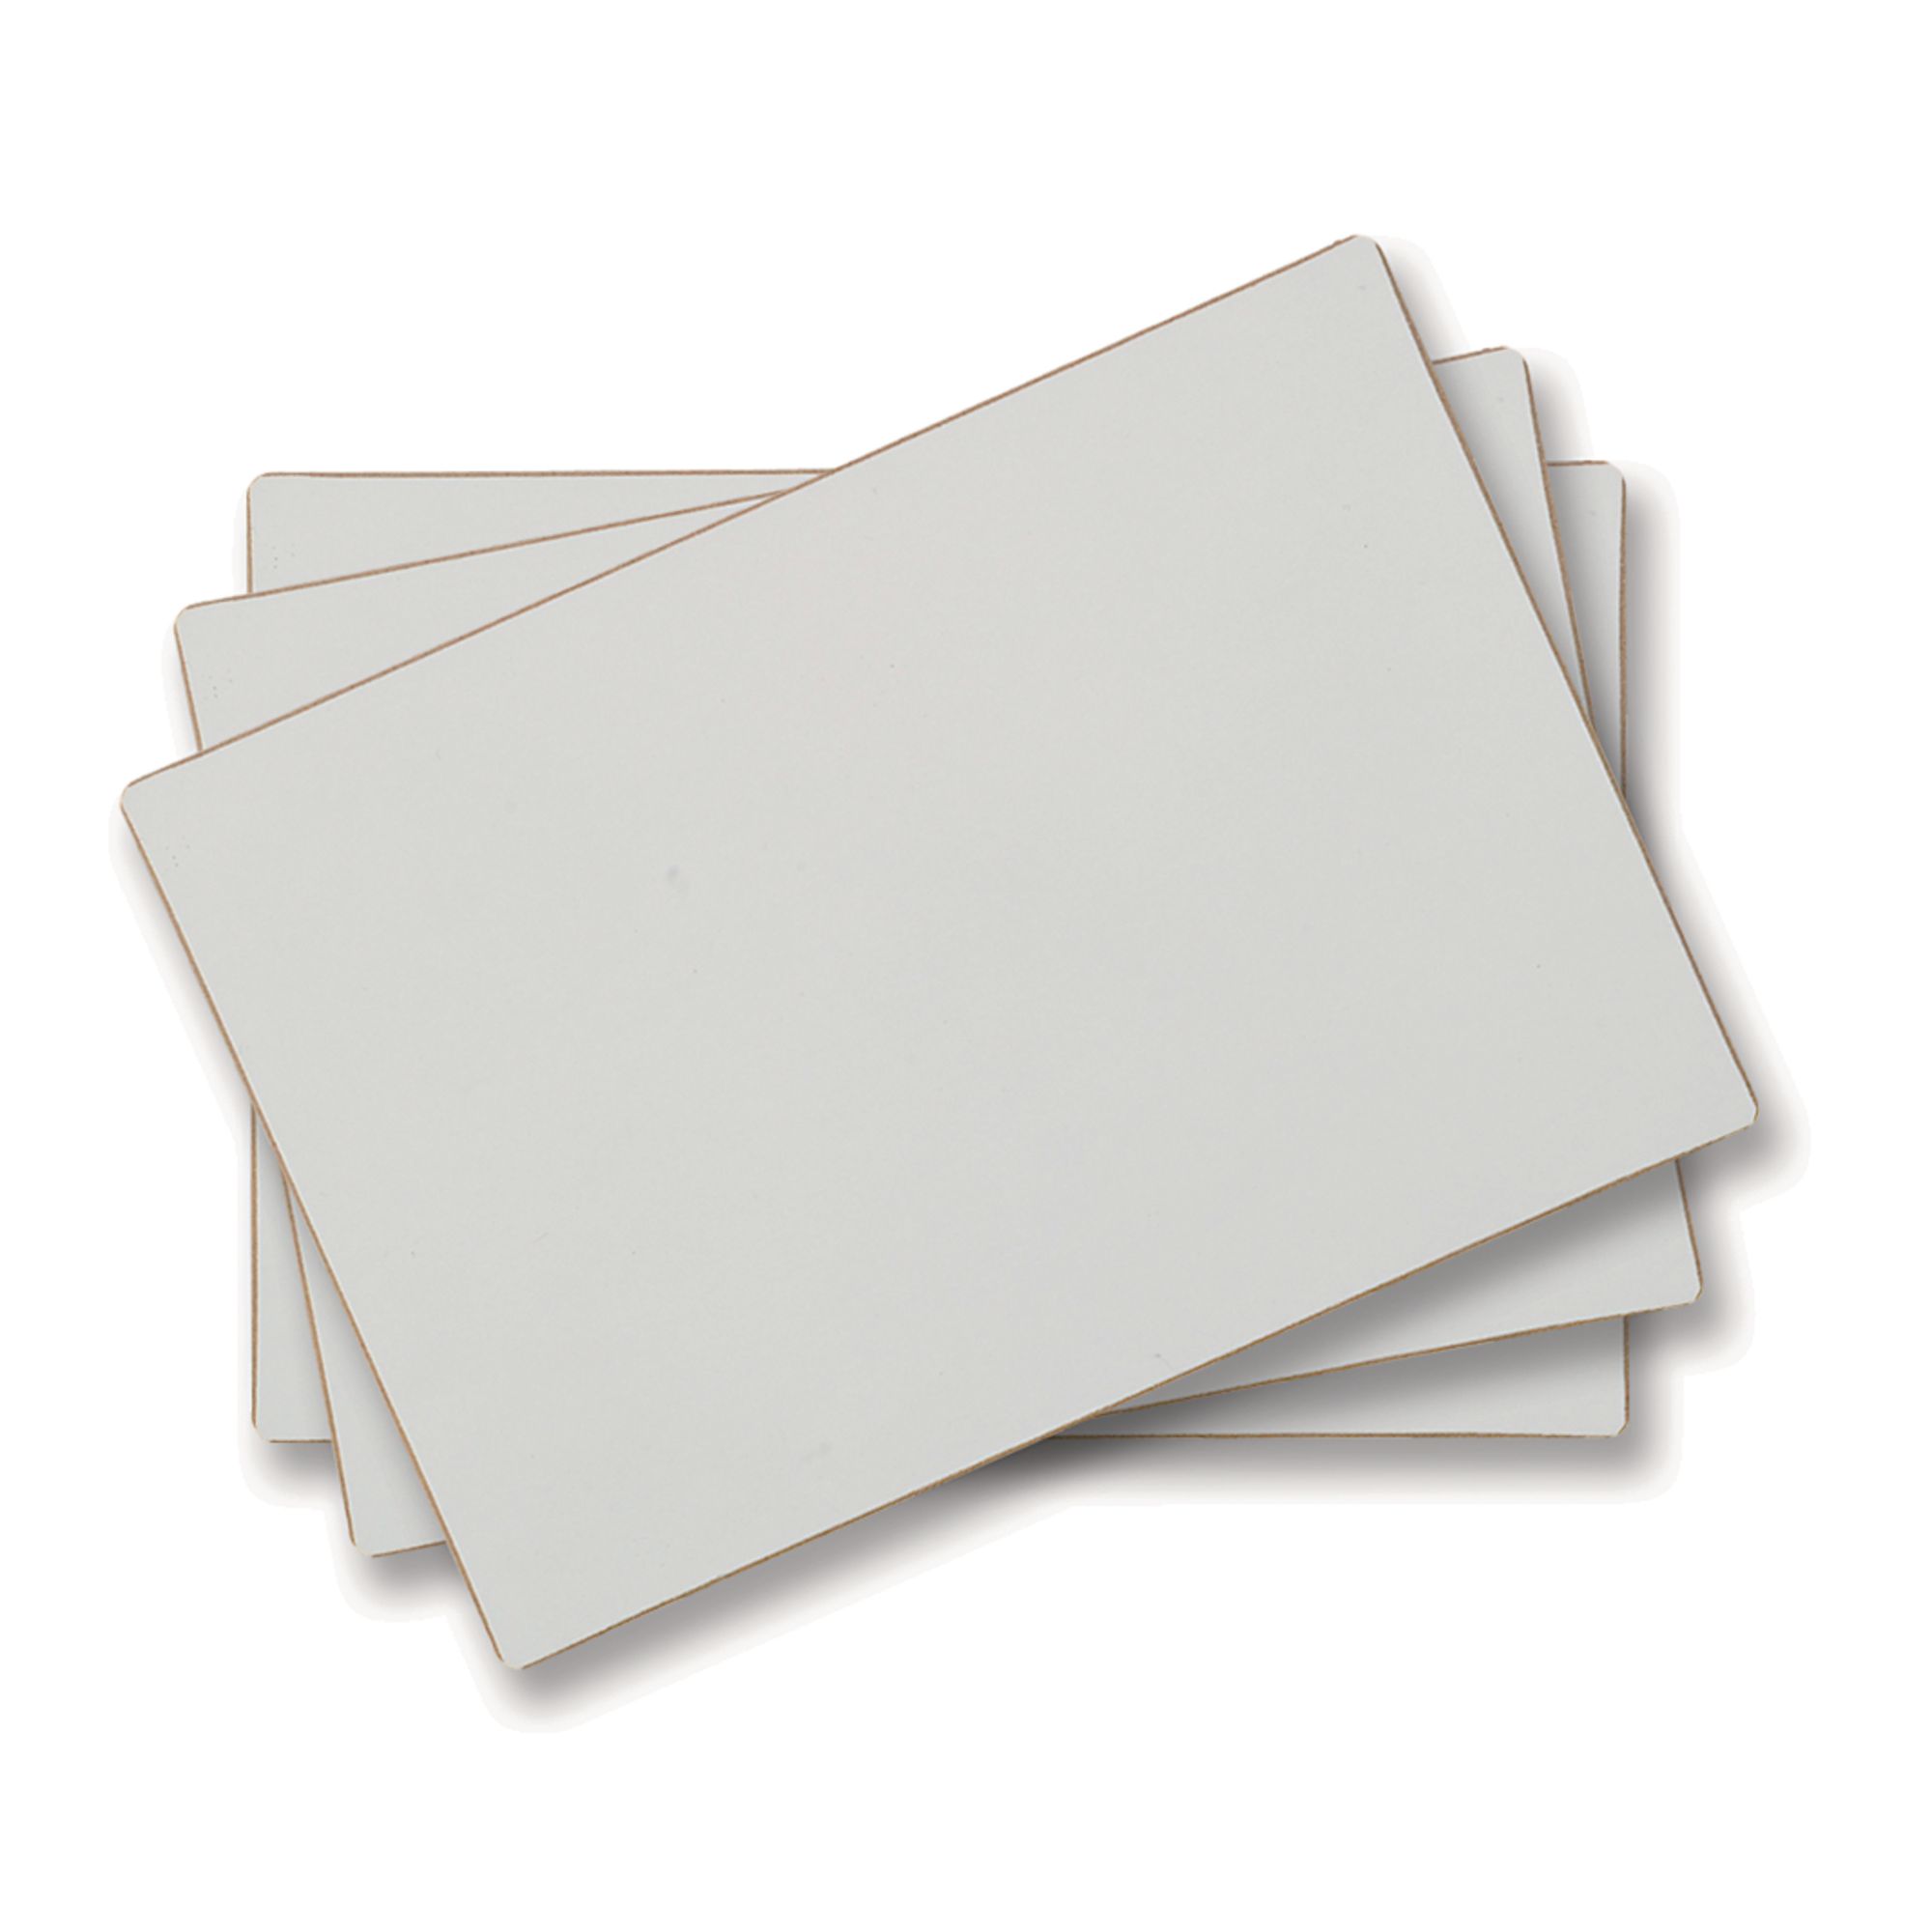 Findel Education A4 Double Sided White Drywipe Lap Boards Pack of 6 